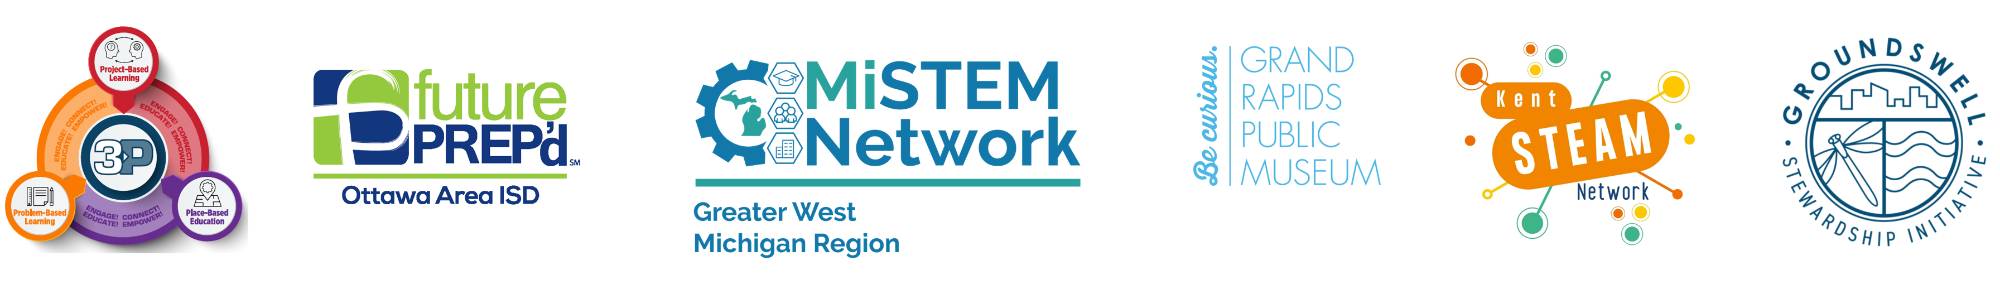 Logos of partners collaborating on this event: Muskegon 3P Learning, futurePREP'd, MiSTEM Network's Greater West Michigan Region, Grand Rapids Public Museum, Kent STEAM Network, Groundswell Stewardship Initiative